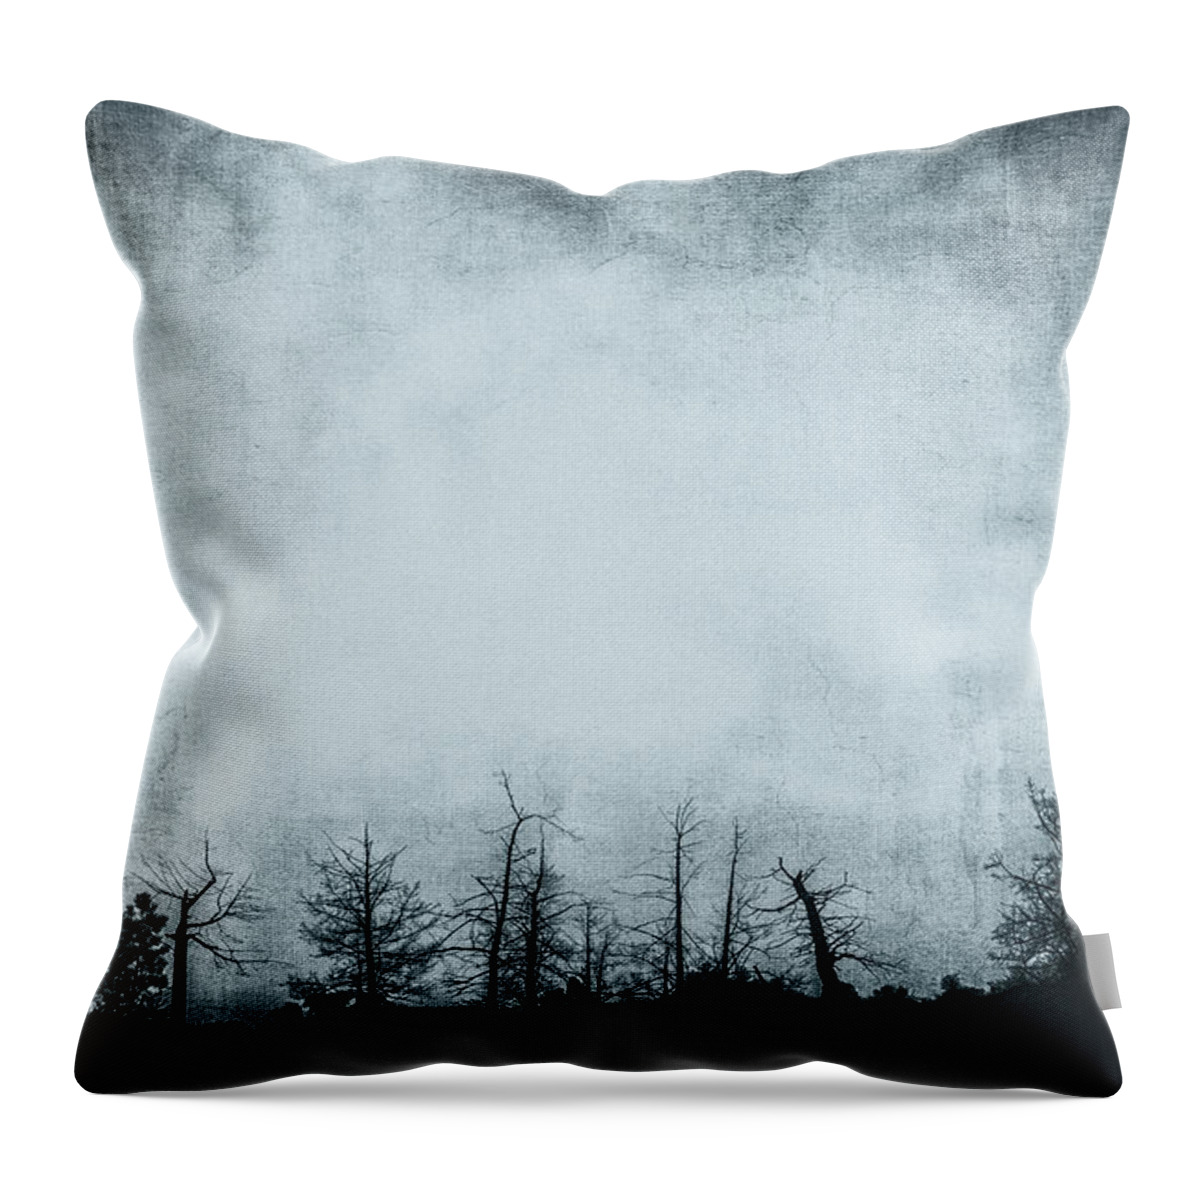 Grunge Throw Pillow featuring the photograph The Trees On The Ridge by Theresa Tahara